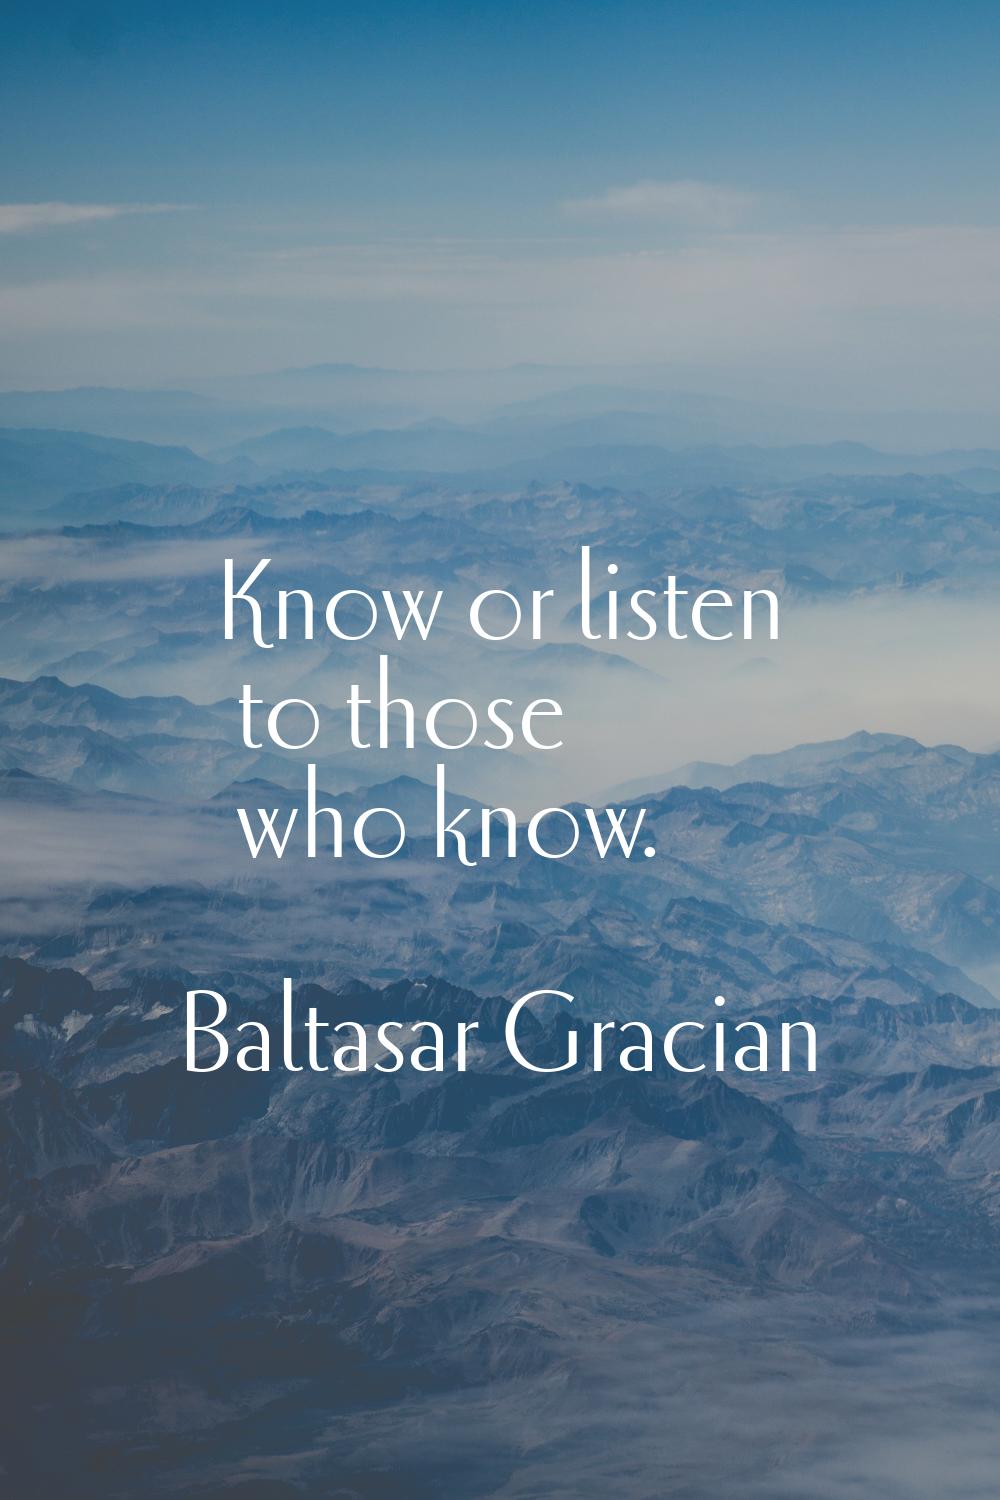 Know or listen to those who know.